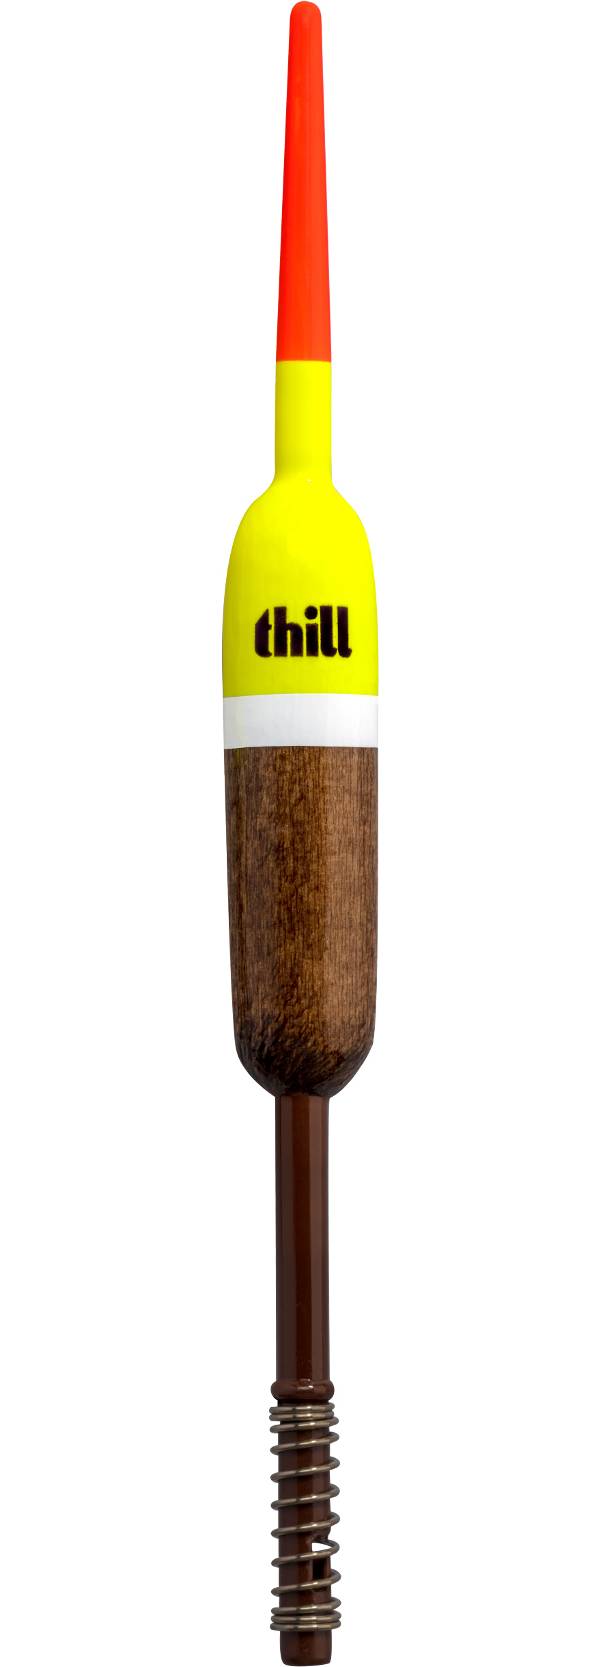 Thill America's Classic Pencil Shape Float product image